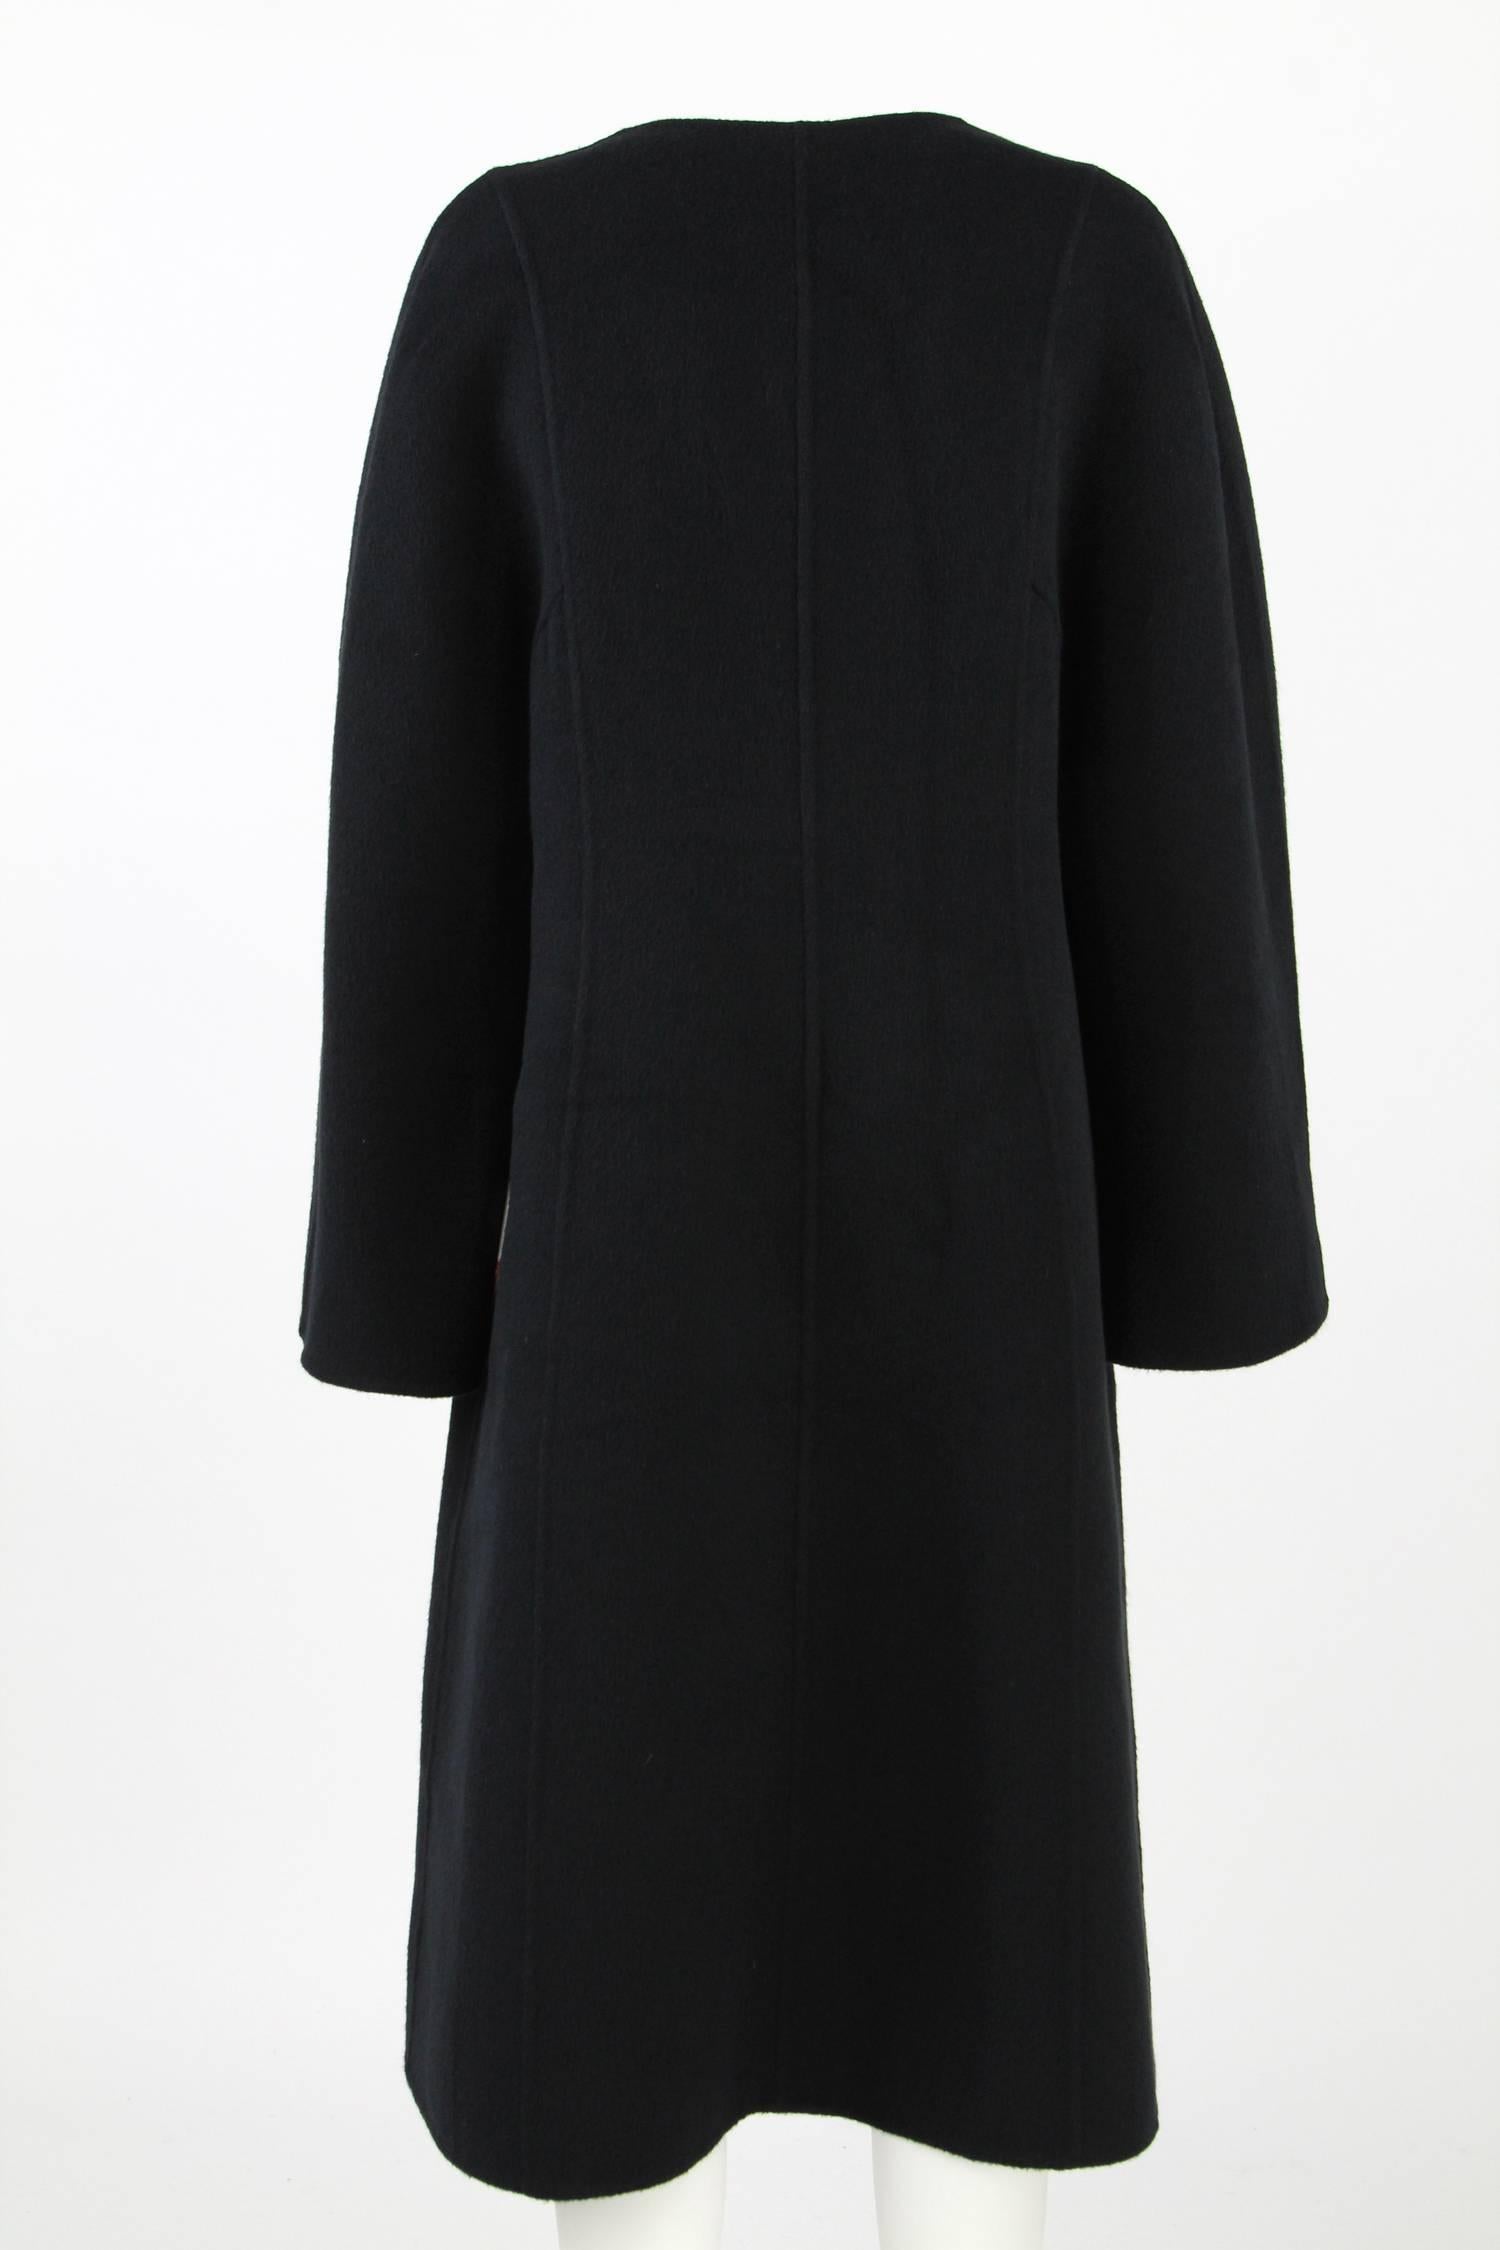 Elegant and confortable Mila Schön cape featuring one button closure and raglan cut sleeves, in excellent conditions. 
Virgin wool and angora blend.
Size 46 IT.

